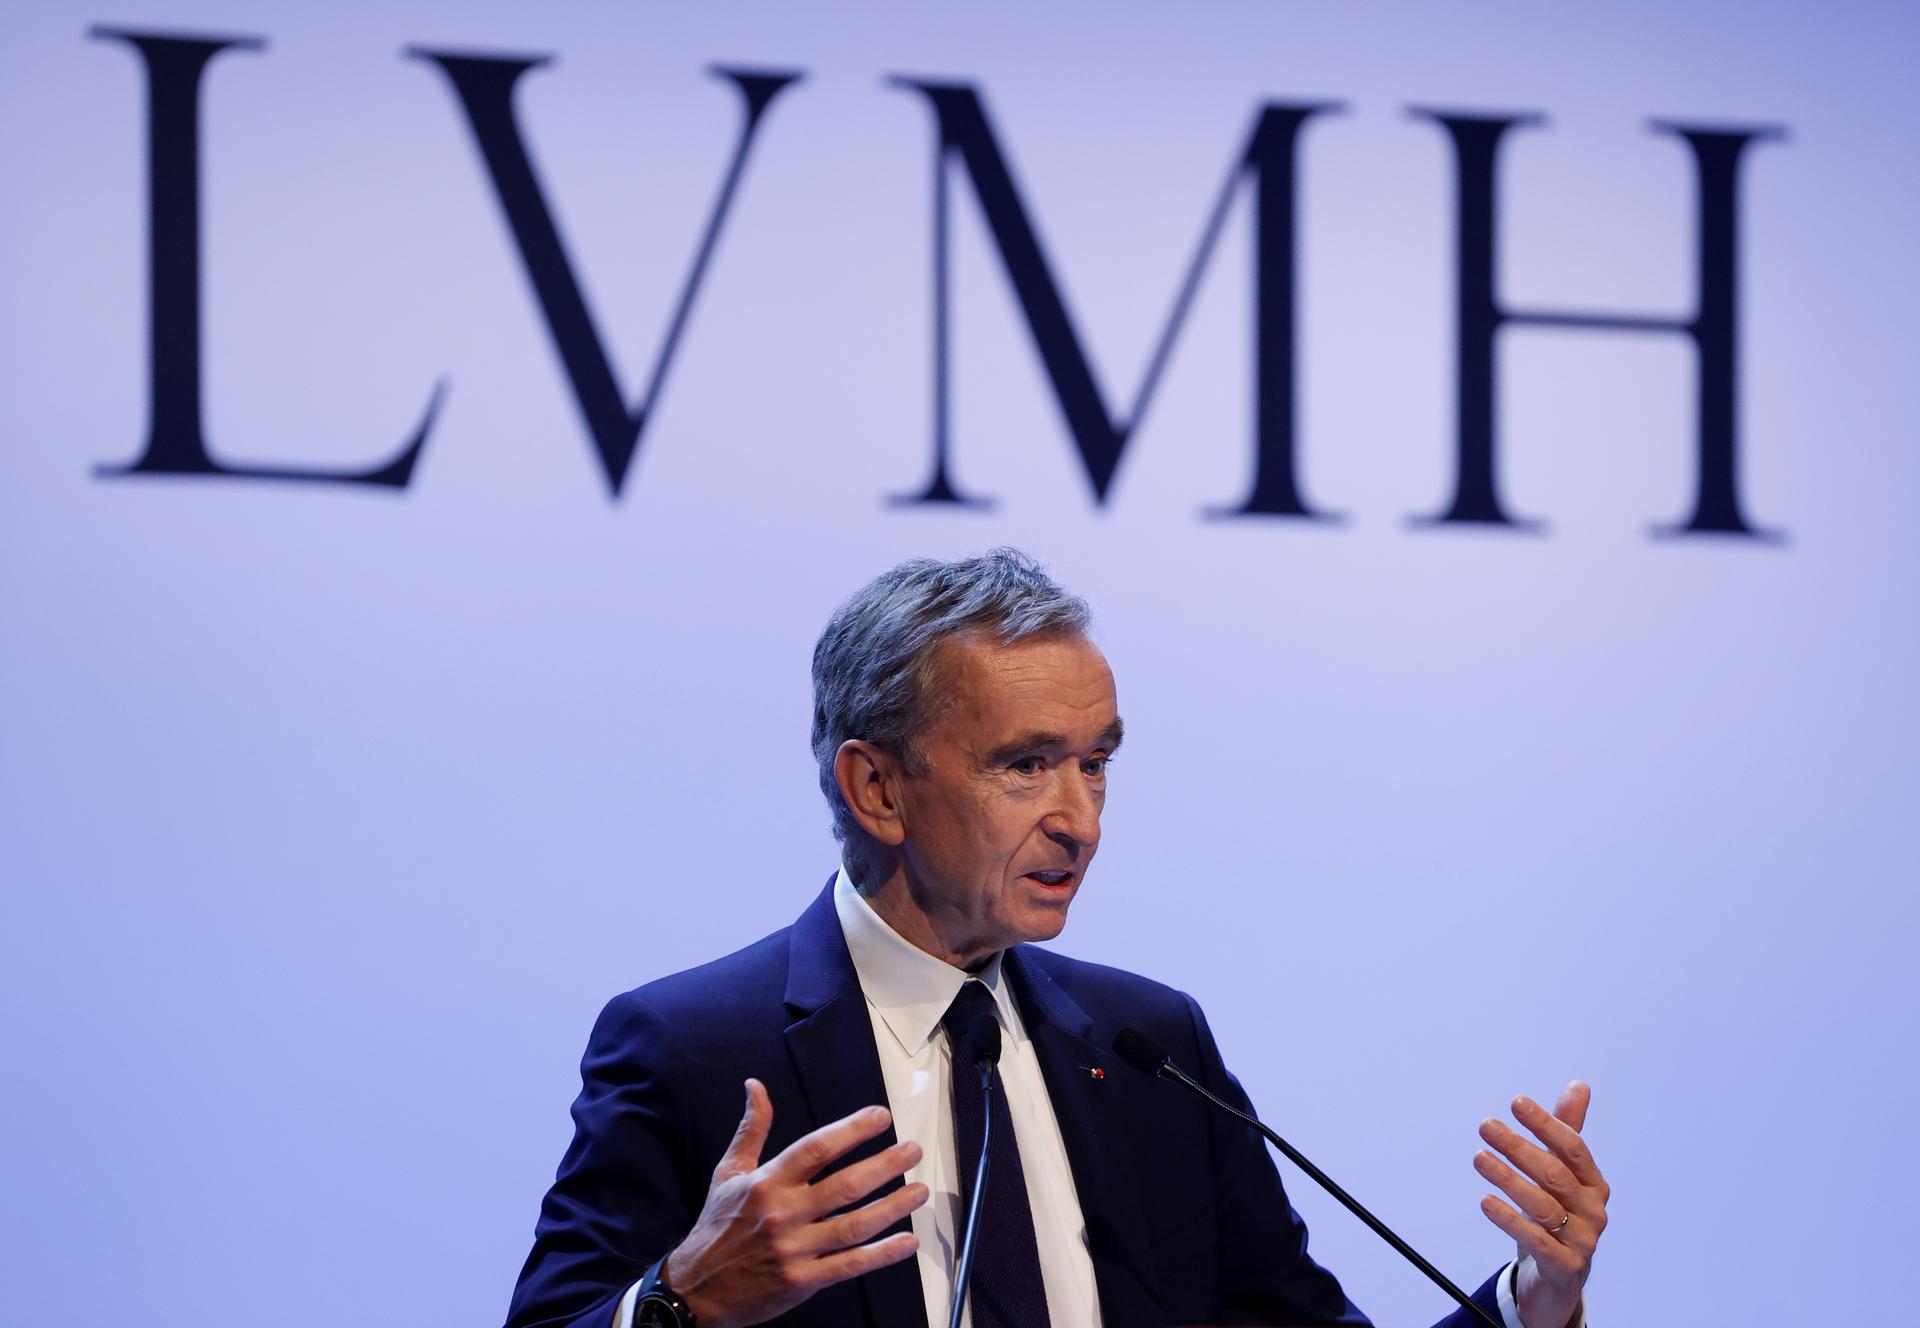 Catterton Partners Joins with Bernard Arnault and LVMH